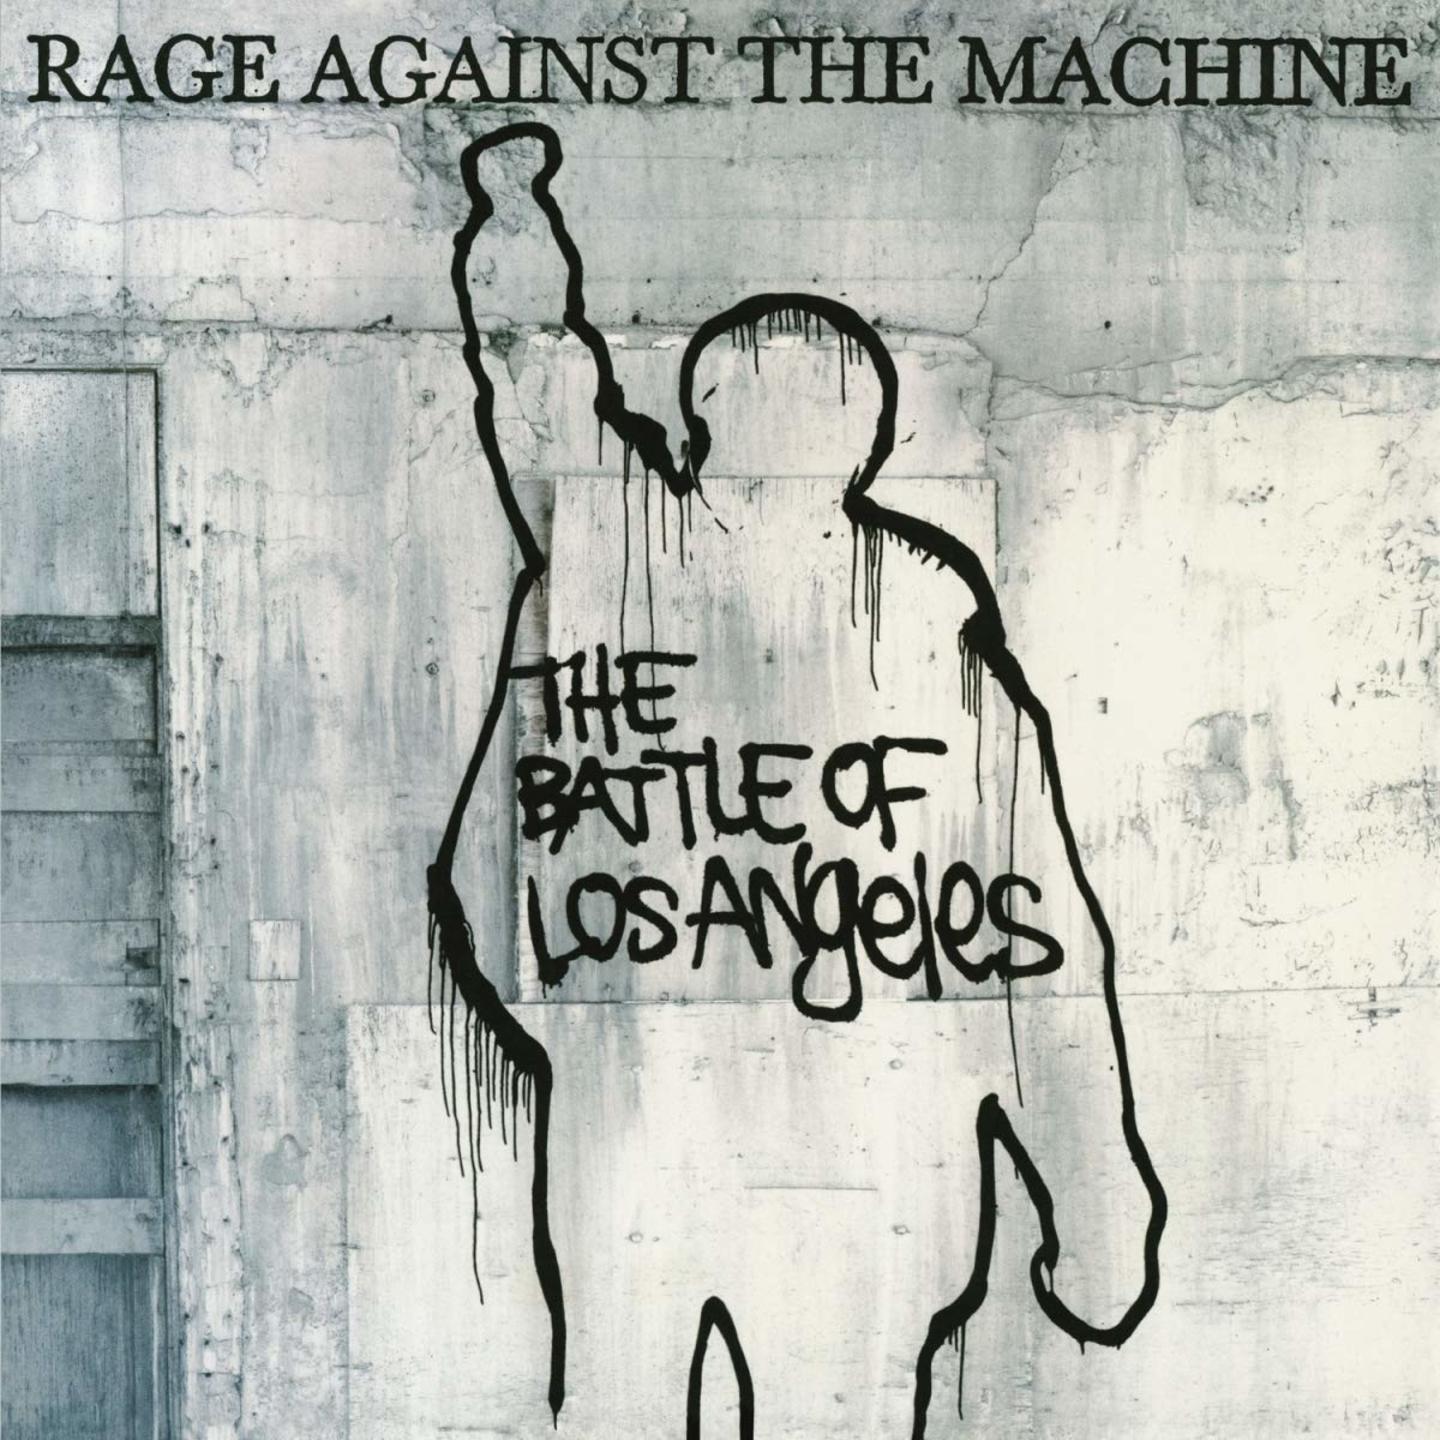 RAGE AGAINST THE MACHINE - The Battle Of Los Angeles LP 180g